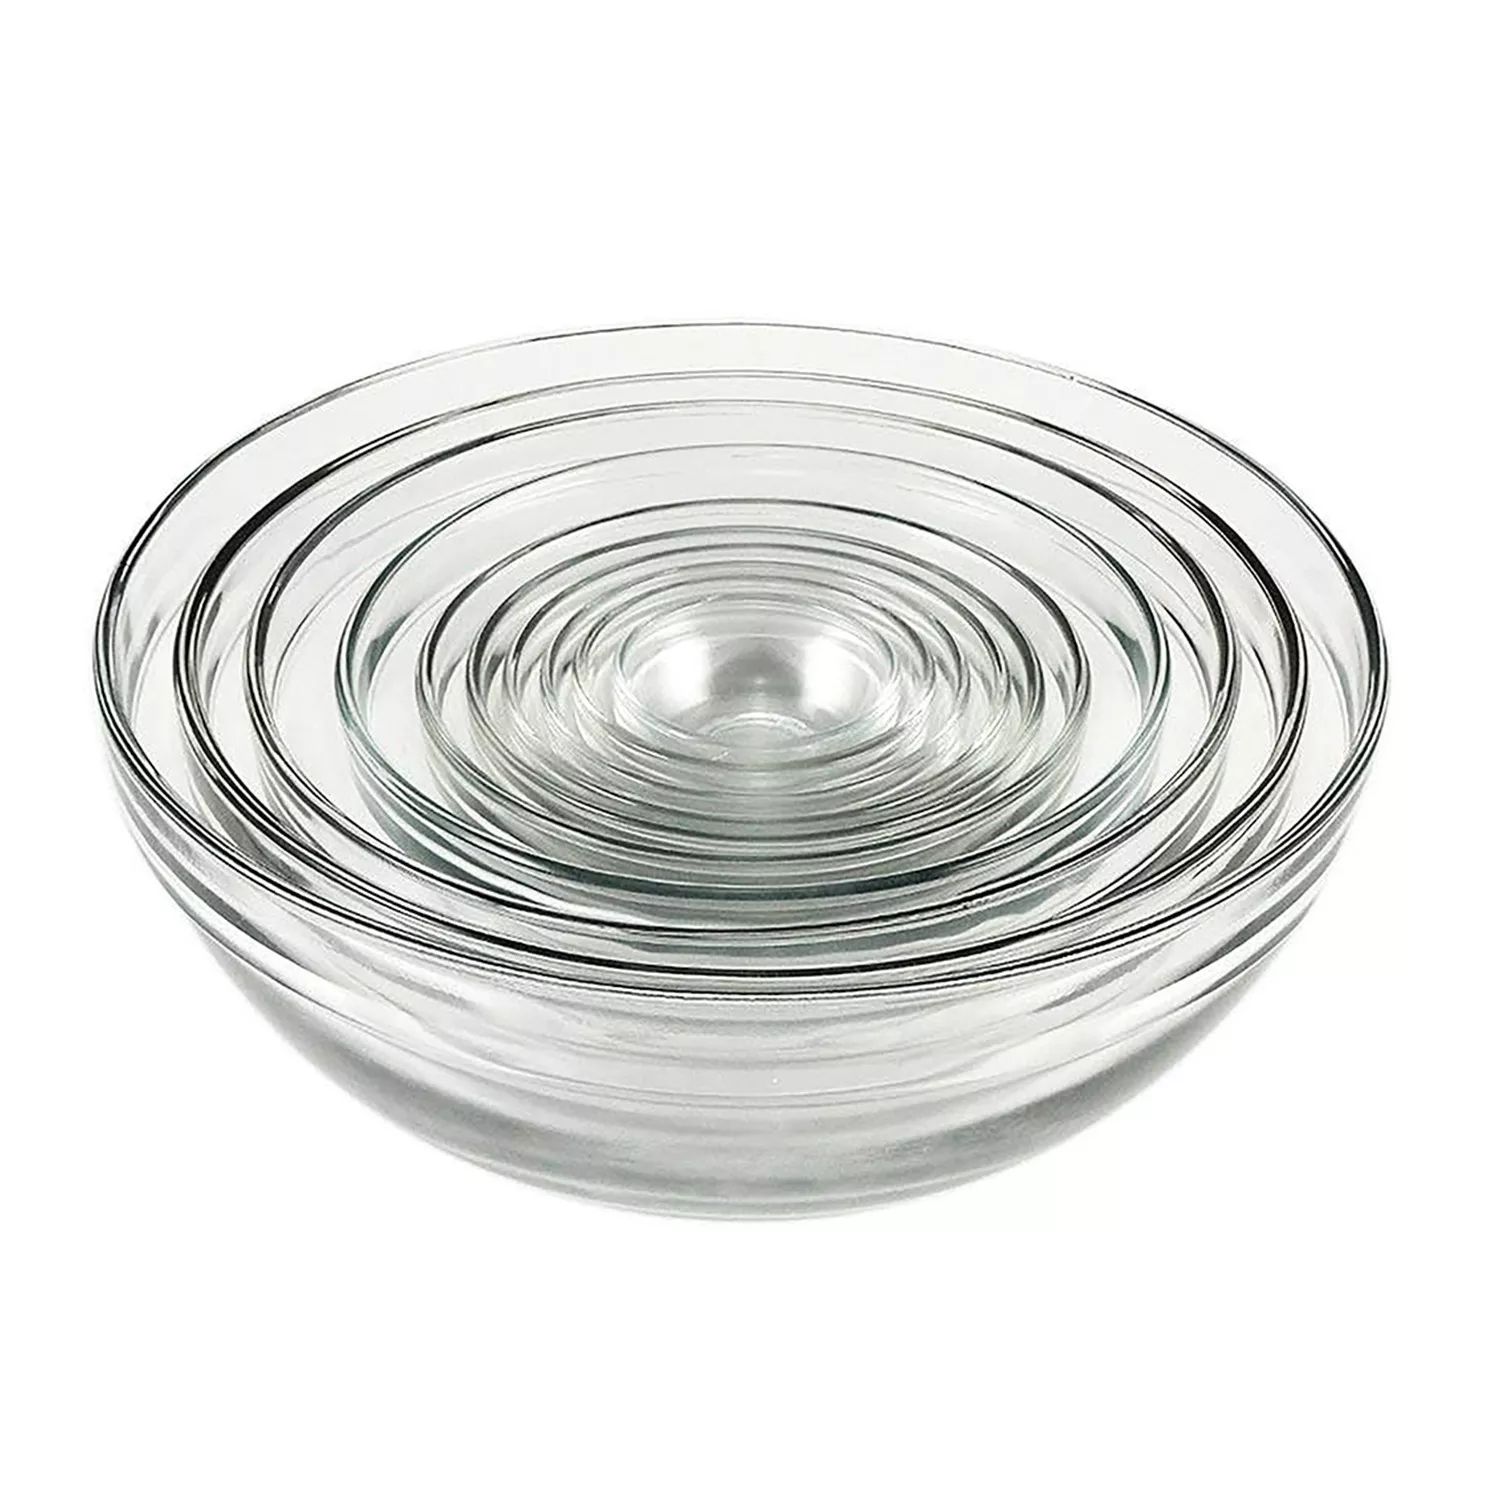 Anchor Hocking Glass Mixing Bowls, Set of 10 | Sur La Table